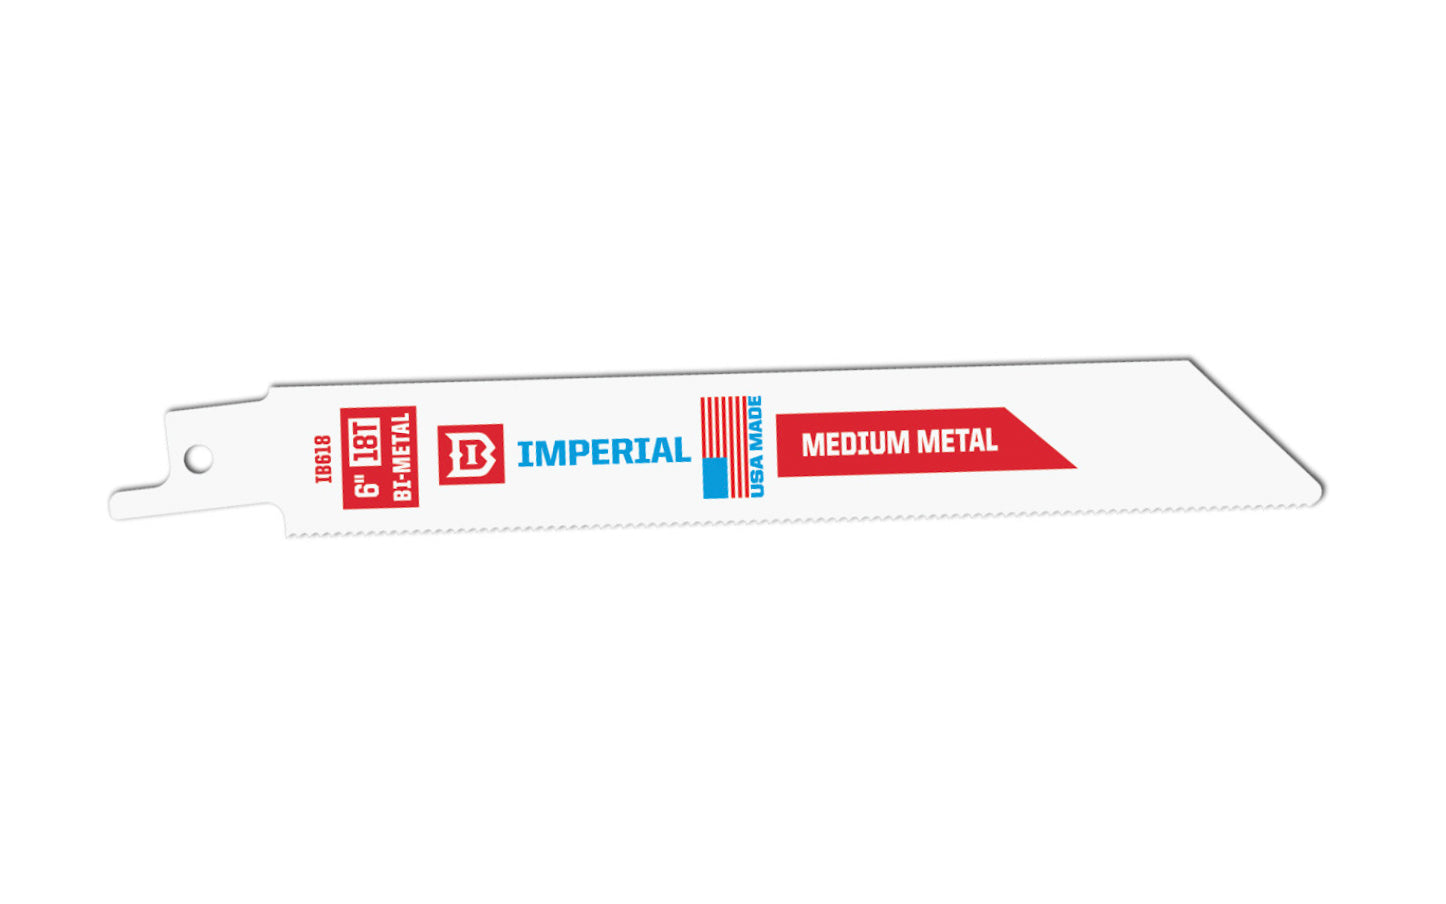 Imperial Blades Standard 6" 18 TPI Medium Metal Reciprocating Blade. Thin .035" kerf  for fast, flexible cuts. Straight blade body for increased beam strength. Recommended for Metal (1/8" to 5/16"), Copper Pipe, Thin Metal, Fiber Cement. Bi-Metal blade. Sold as 1 blade. Model IB618-B. Made in USA